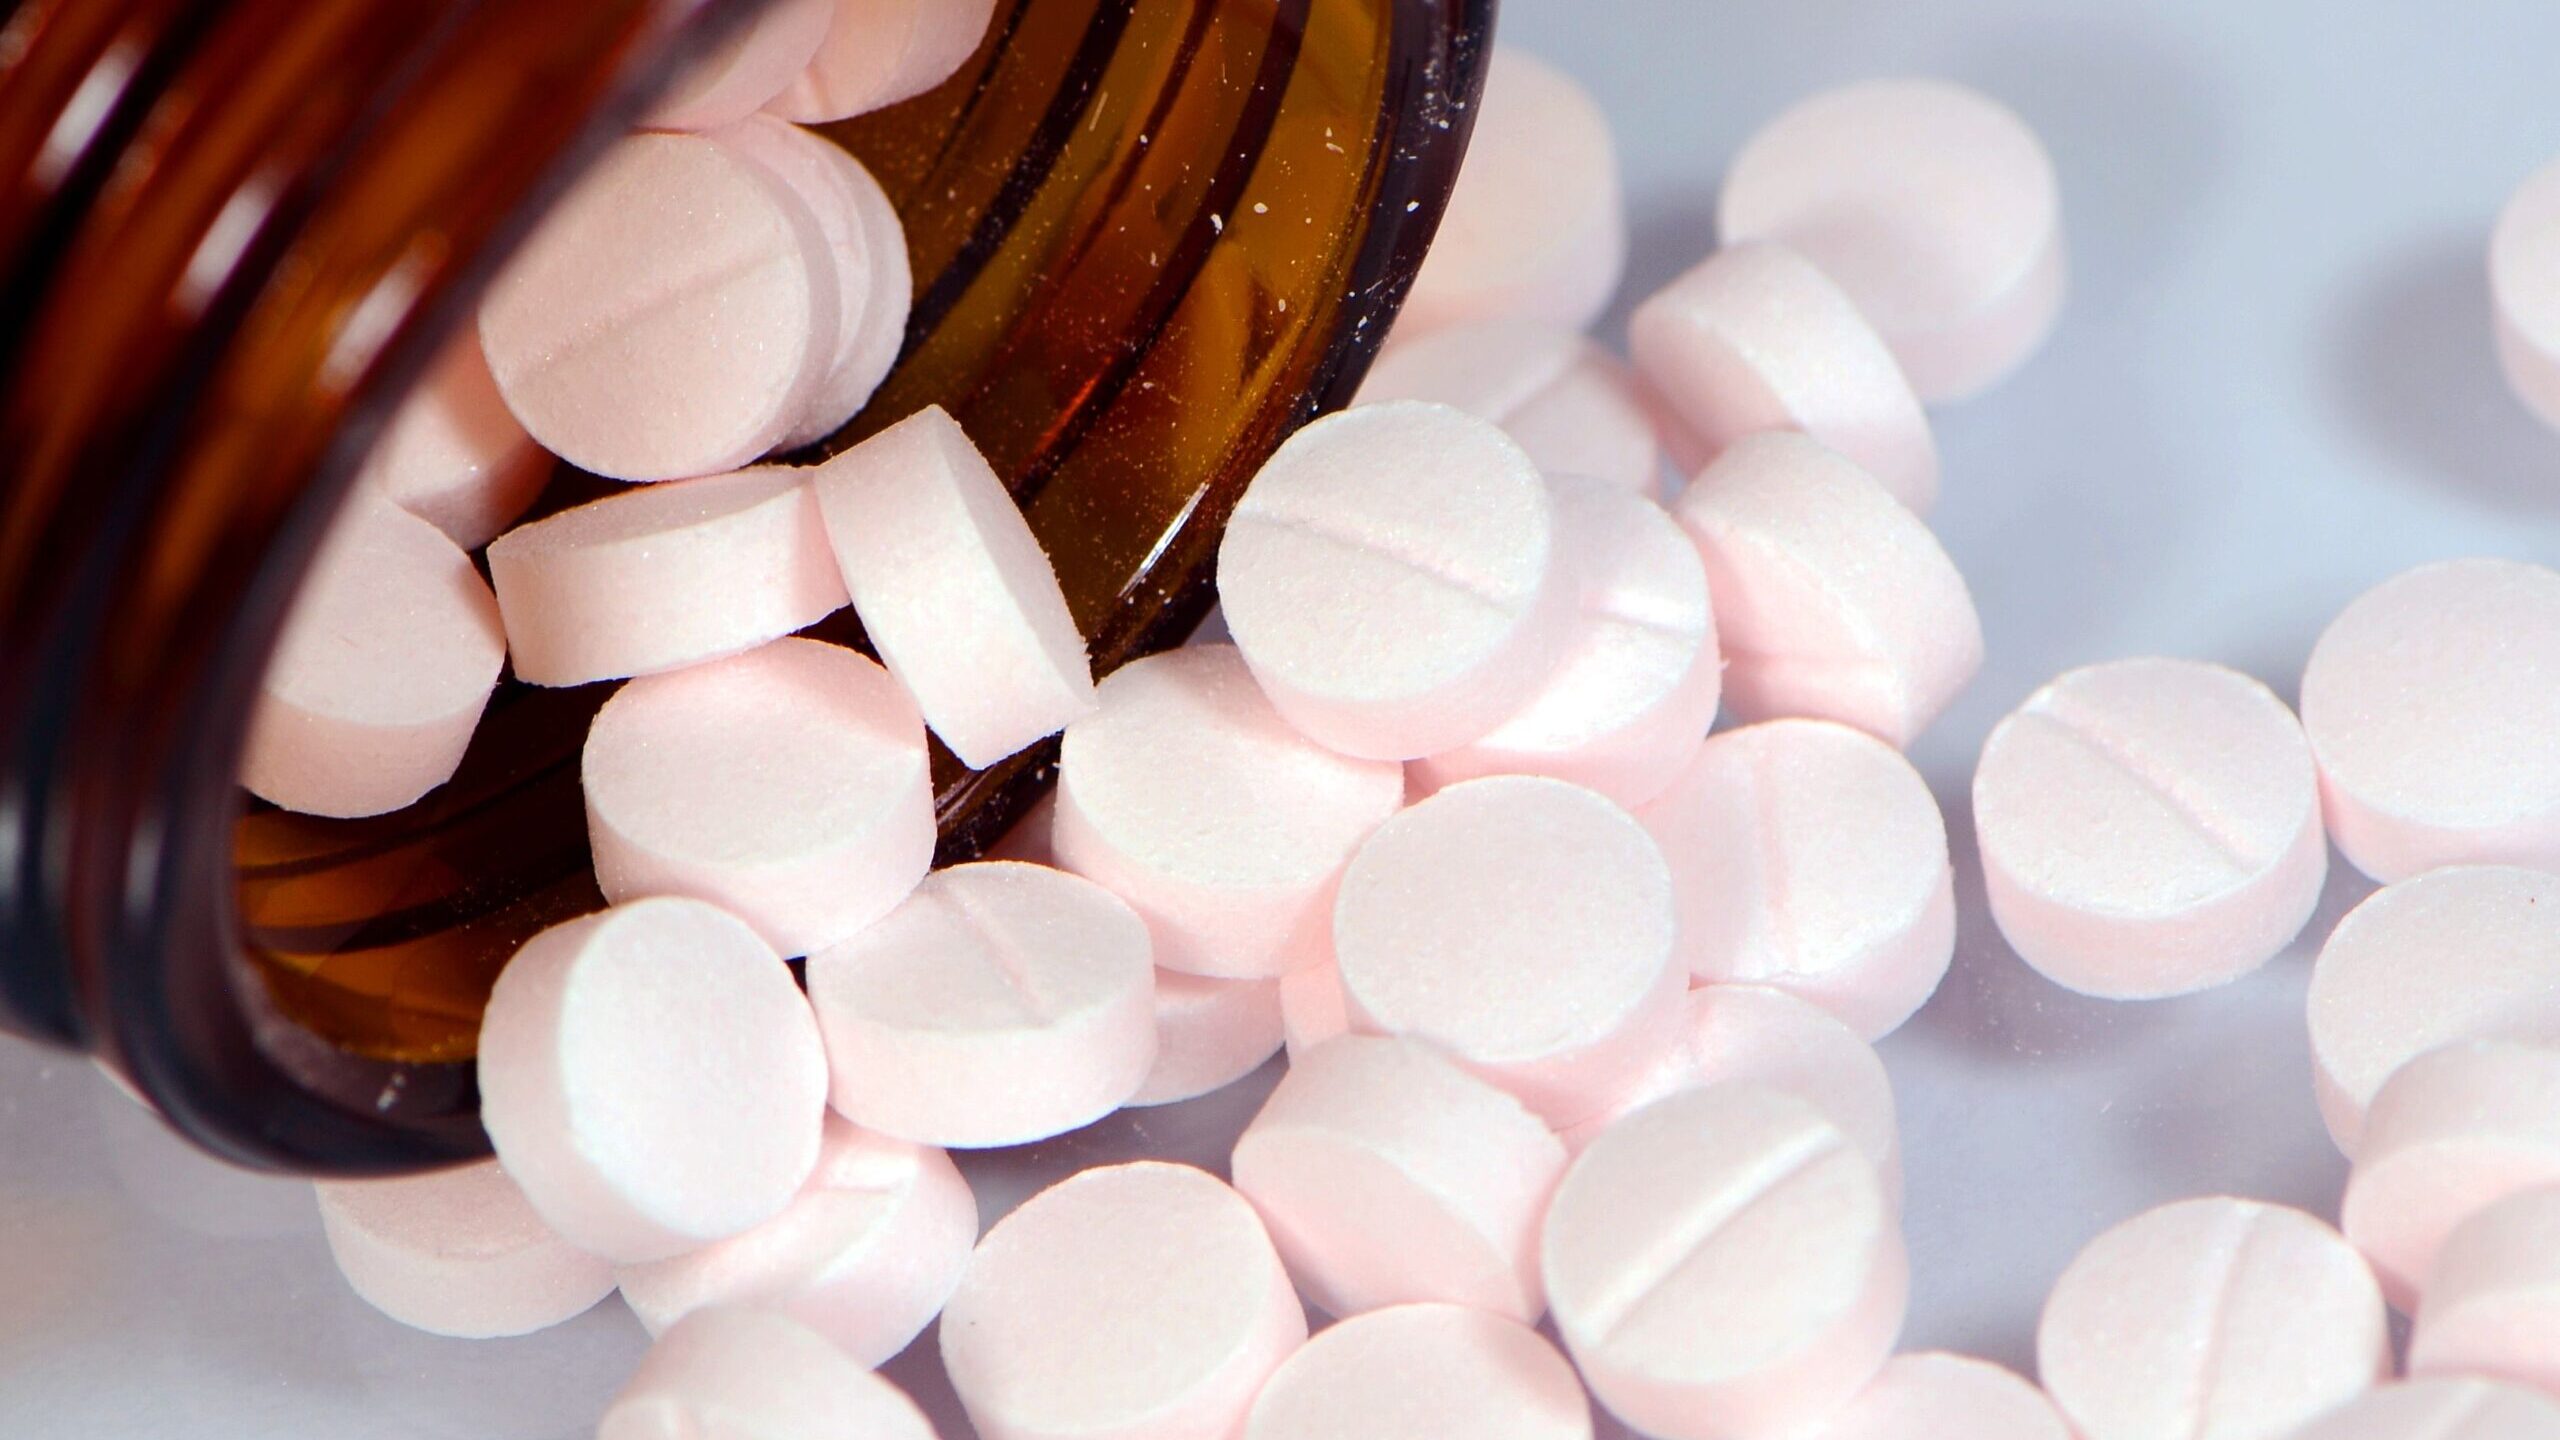 Adults in the study who took aspirin were 20% more likely to be anemic than those who didn’t take...